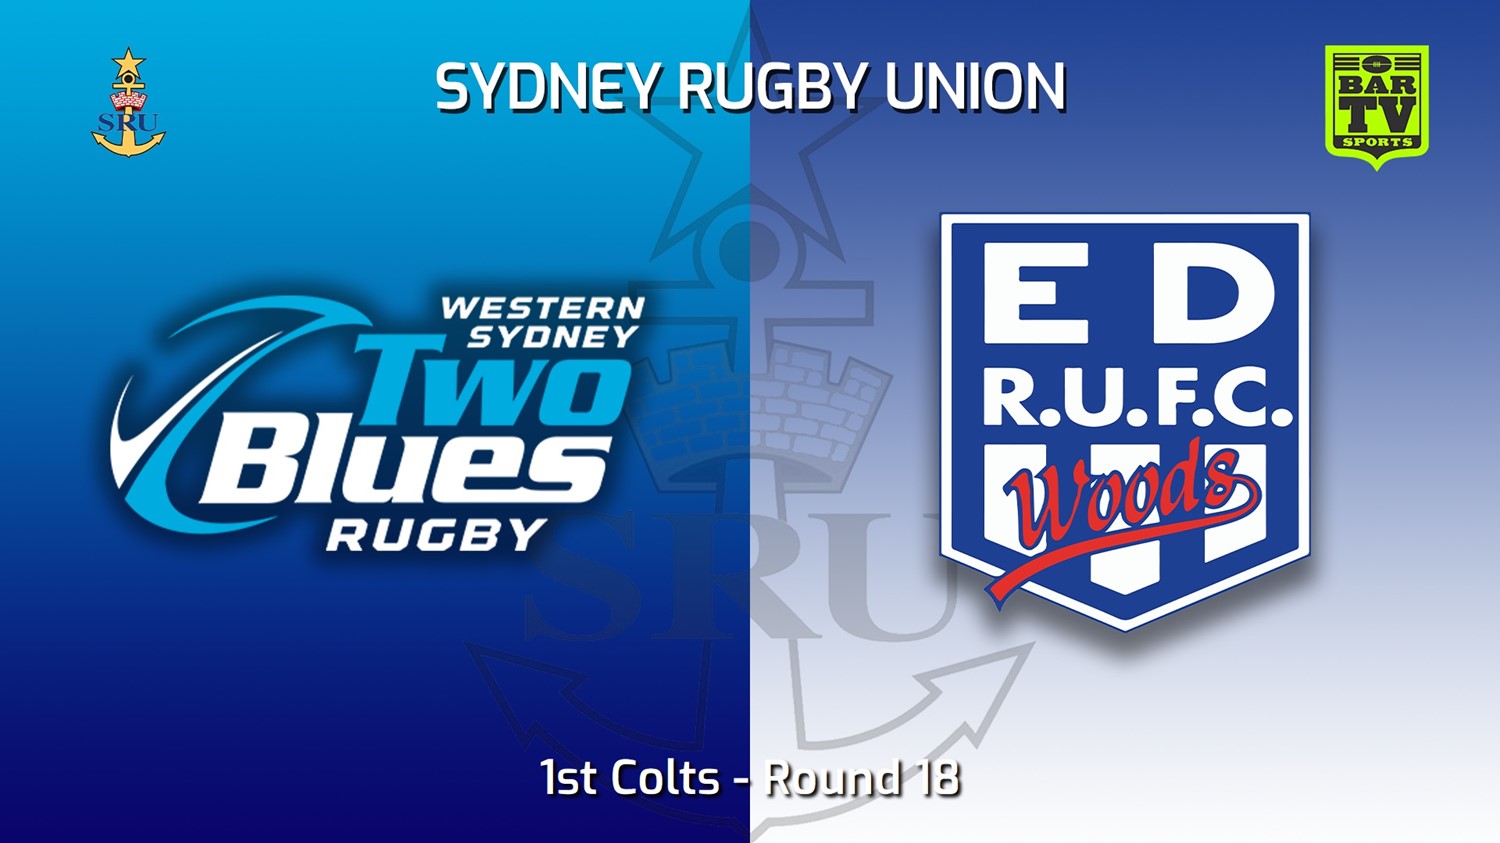 220806-Sydney Rugby Union Round 18 - 1st Colts - Two Blues v Eastwood Slate Image